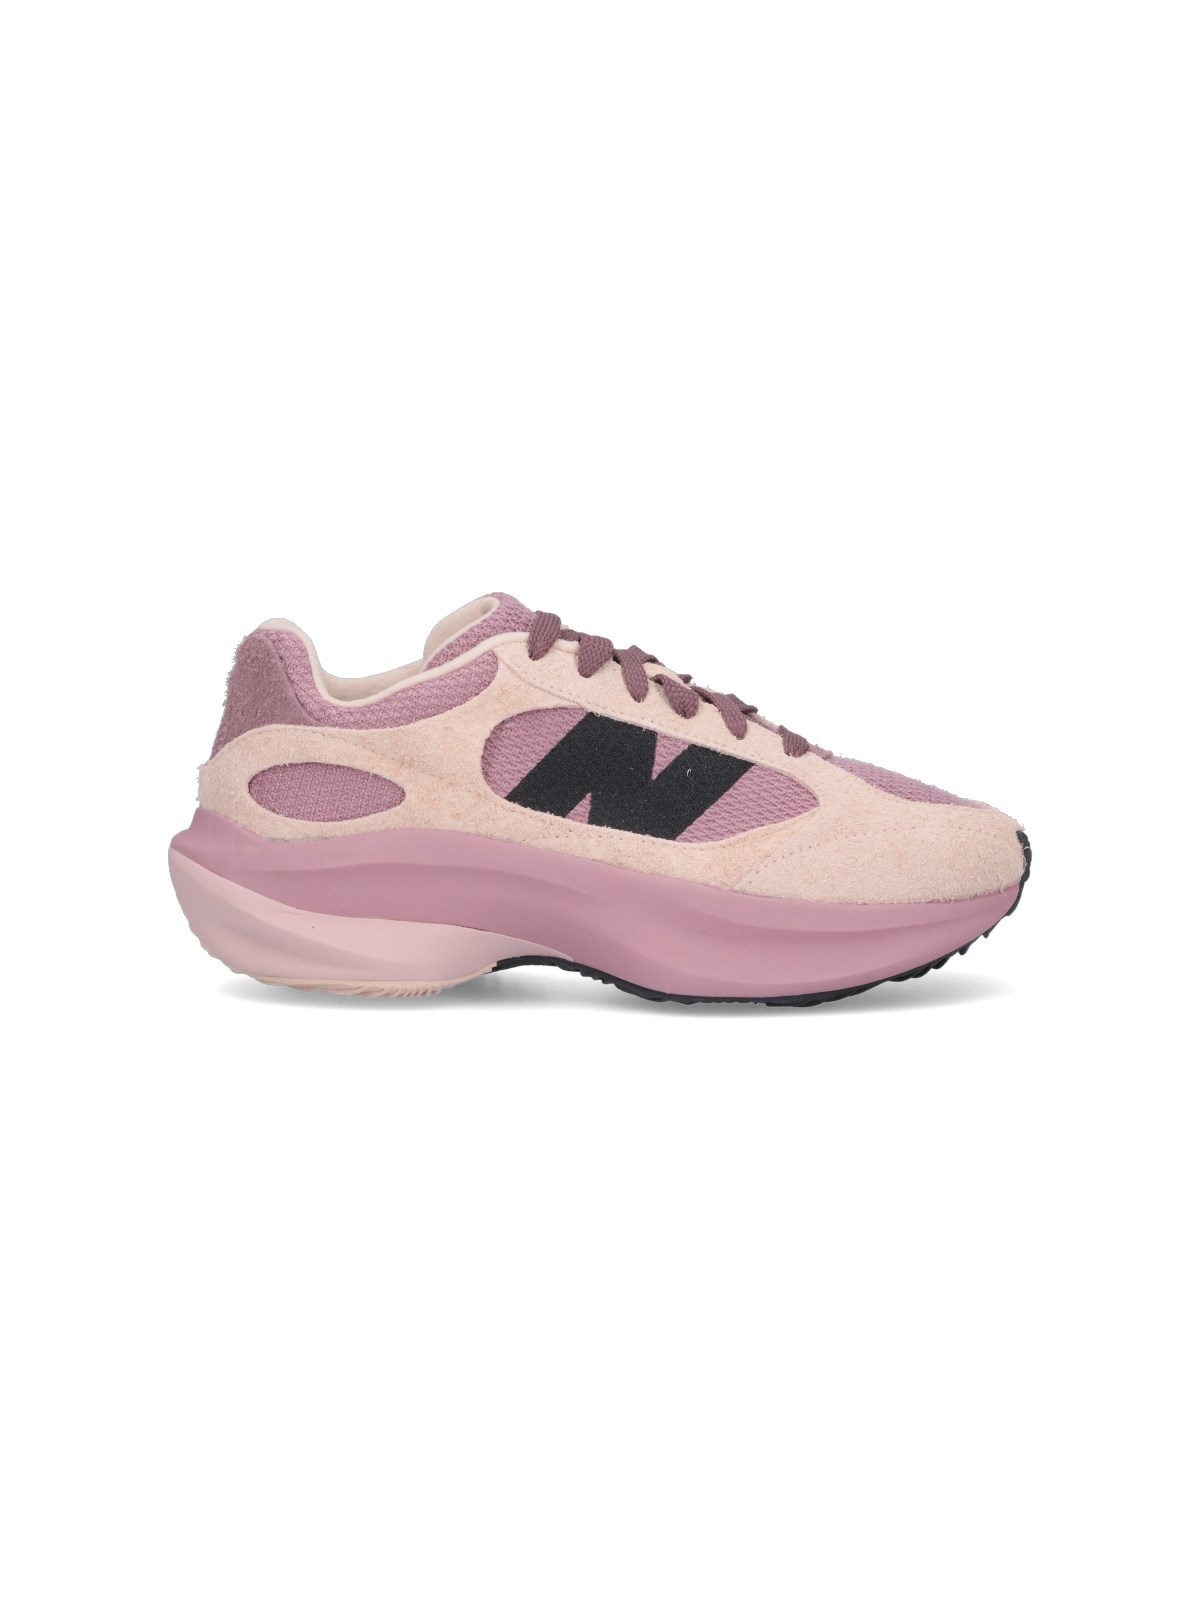 Shop New Balance "wrpd Runner" Sneakers In Pink